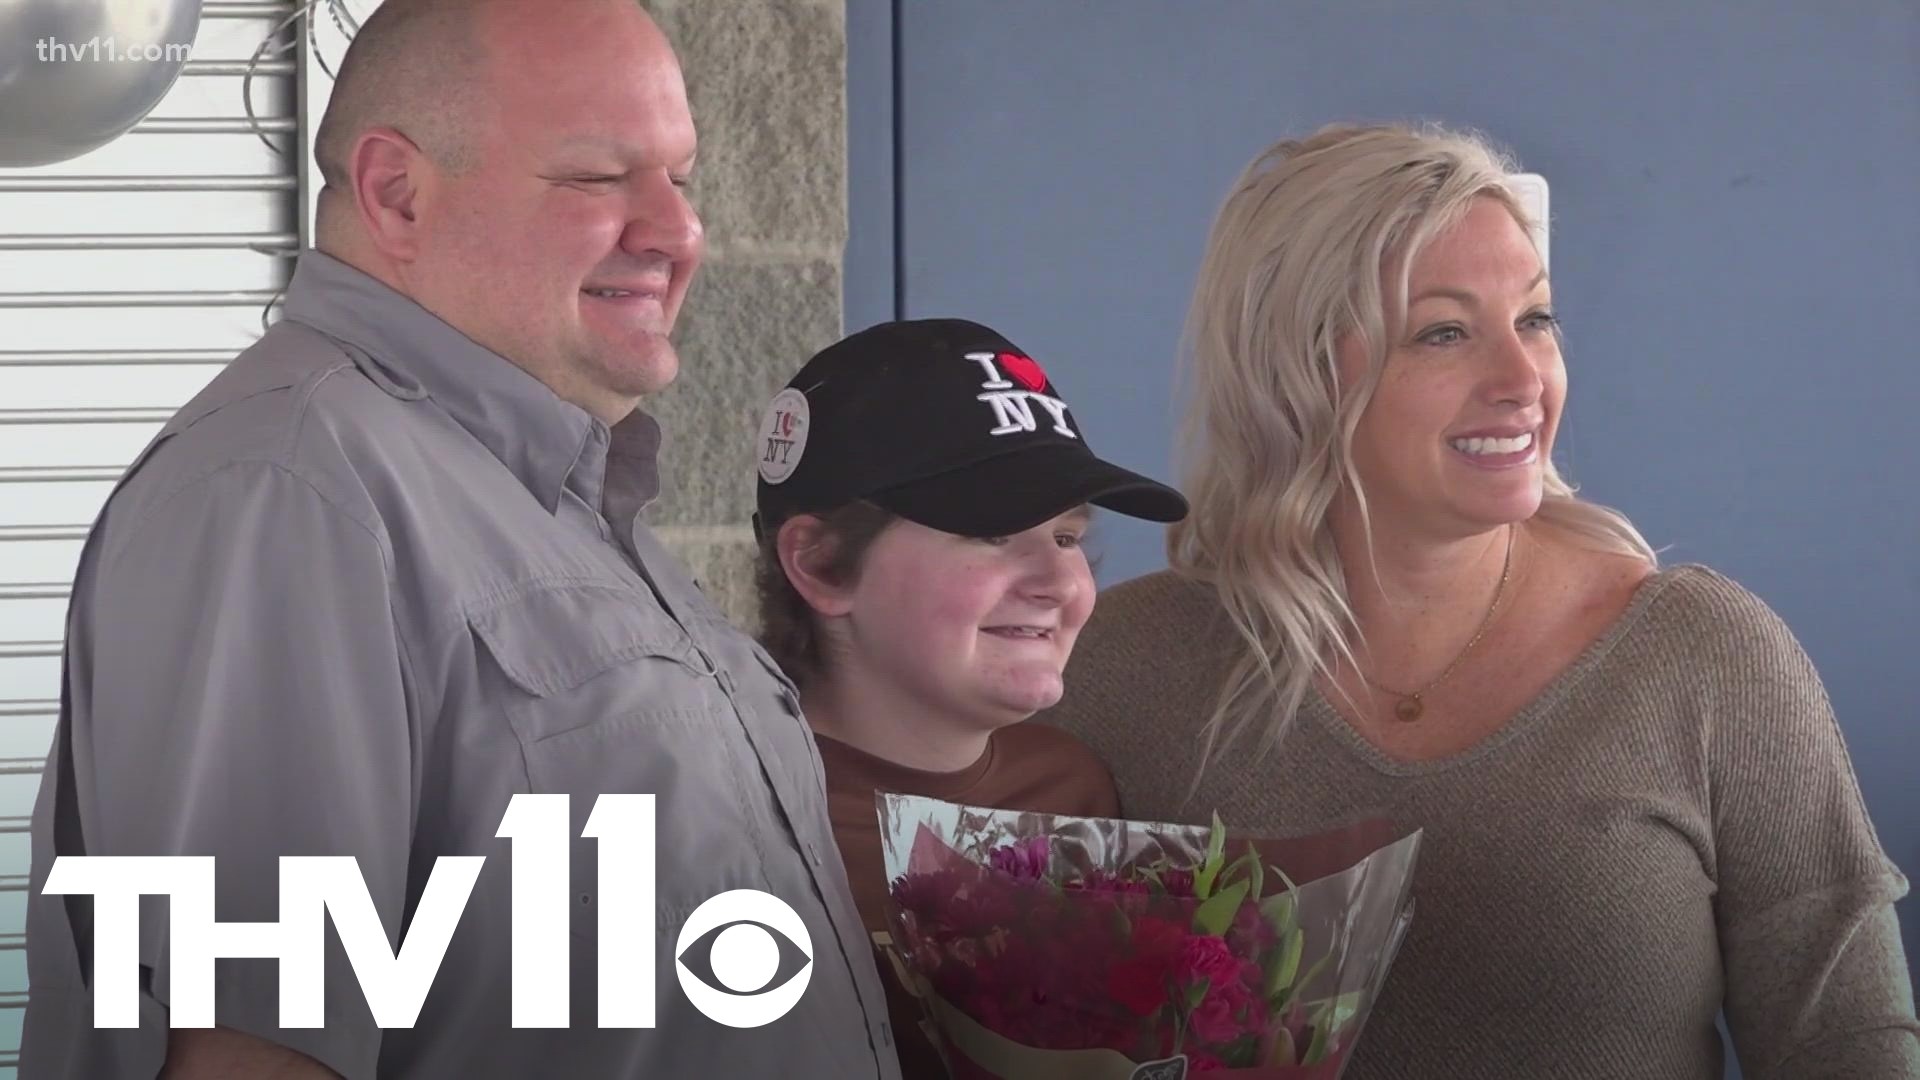 Ashley Pearson has always wanted to visit New York City and now thanks to the Make-a-Wish foundation she's heading to The Big Apple in less than a week!